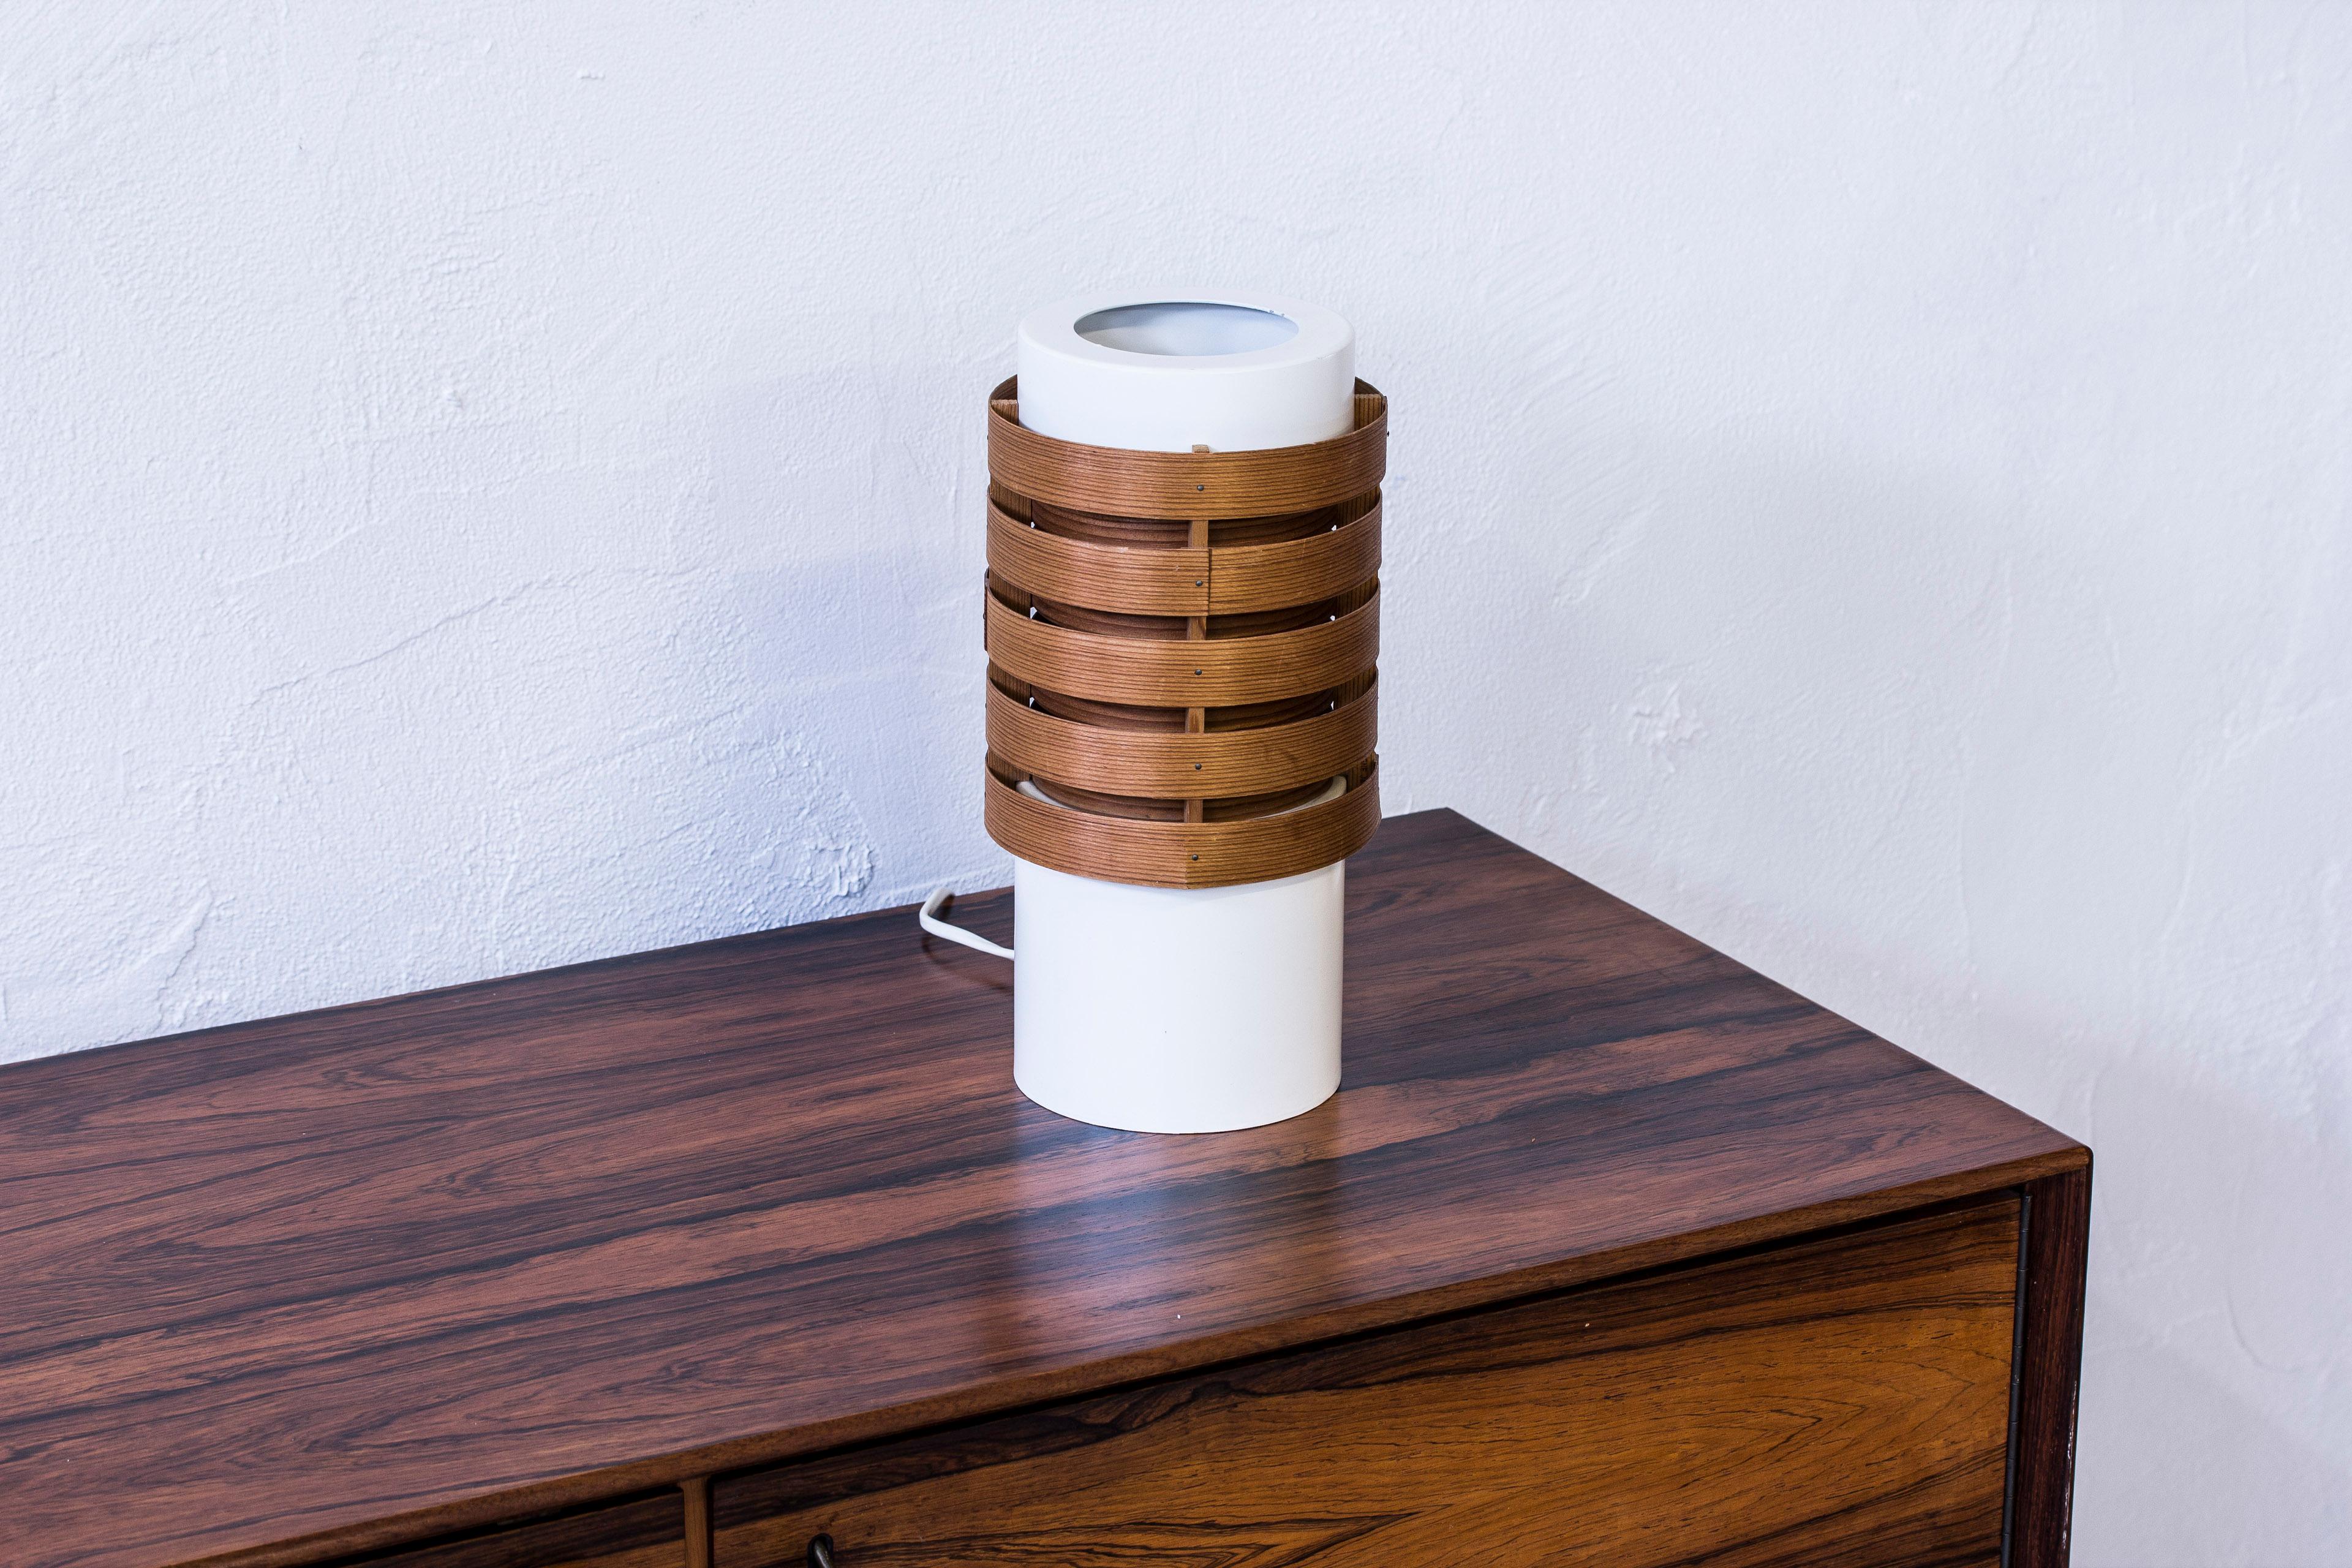 Very rare table lamp model B108 designed by Hans Agne Jakobsson. Produced by Ellysett in Sweden, circa1965. Made from white lacquered aluminium and pine veneer. Signed with label and impressed burn mark on the wooden part. Very good condition with